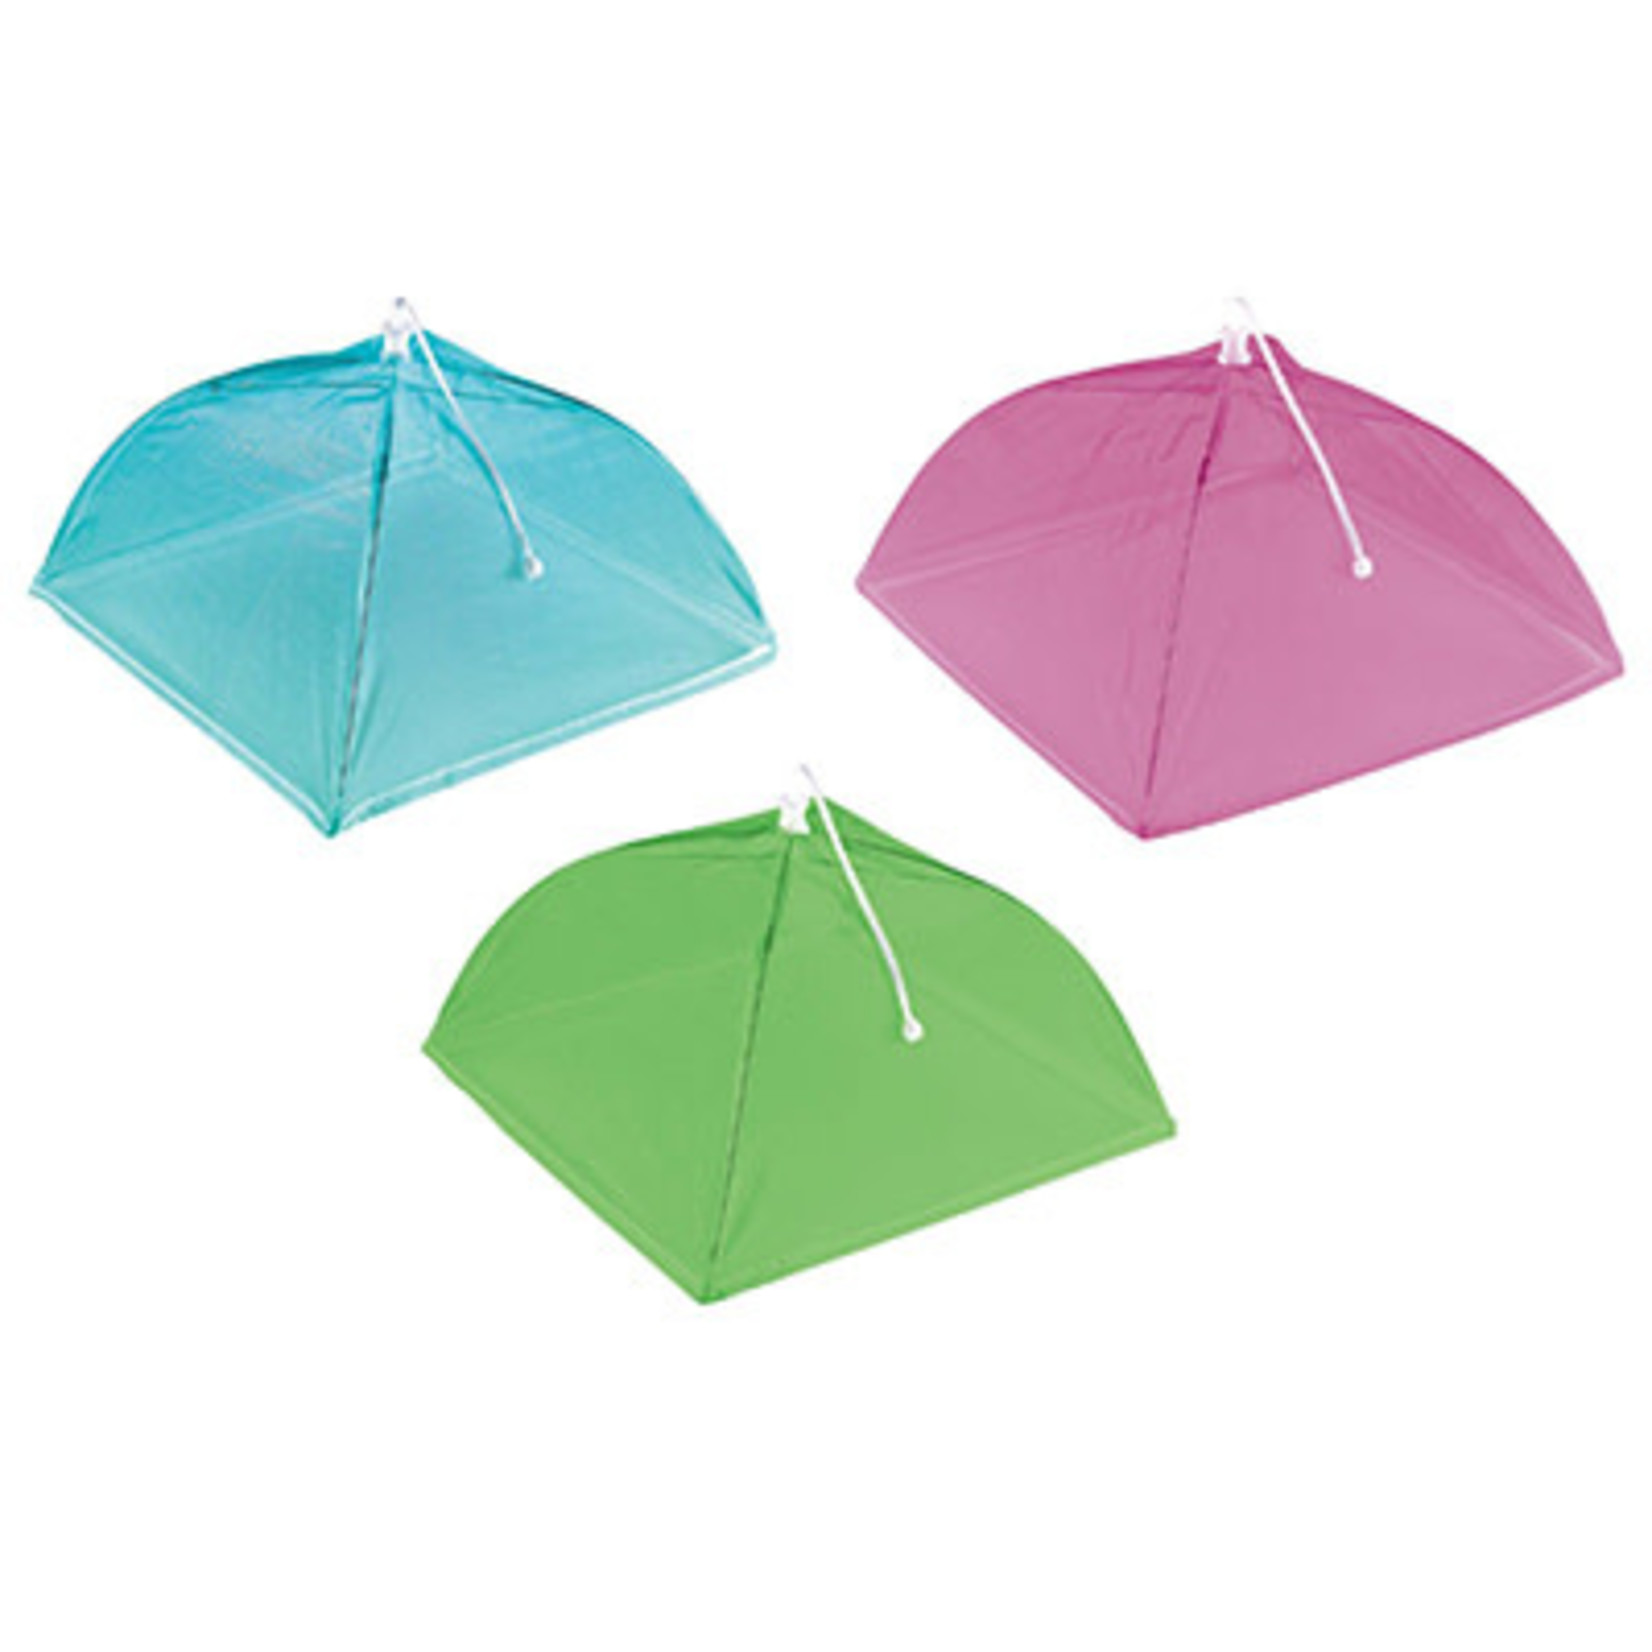 Amscan Summer Bright Food Covers - 3ct.